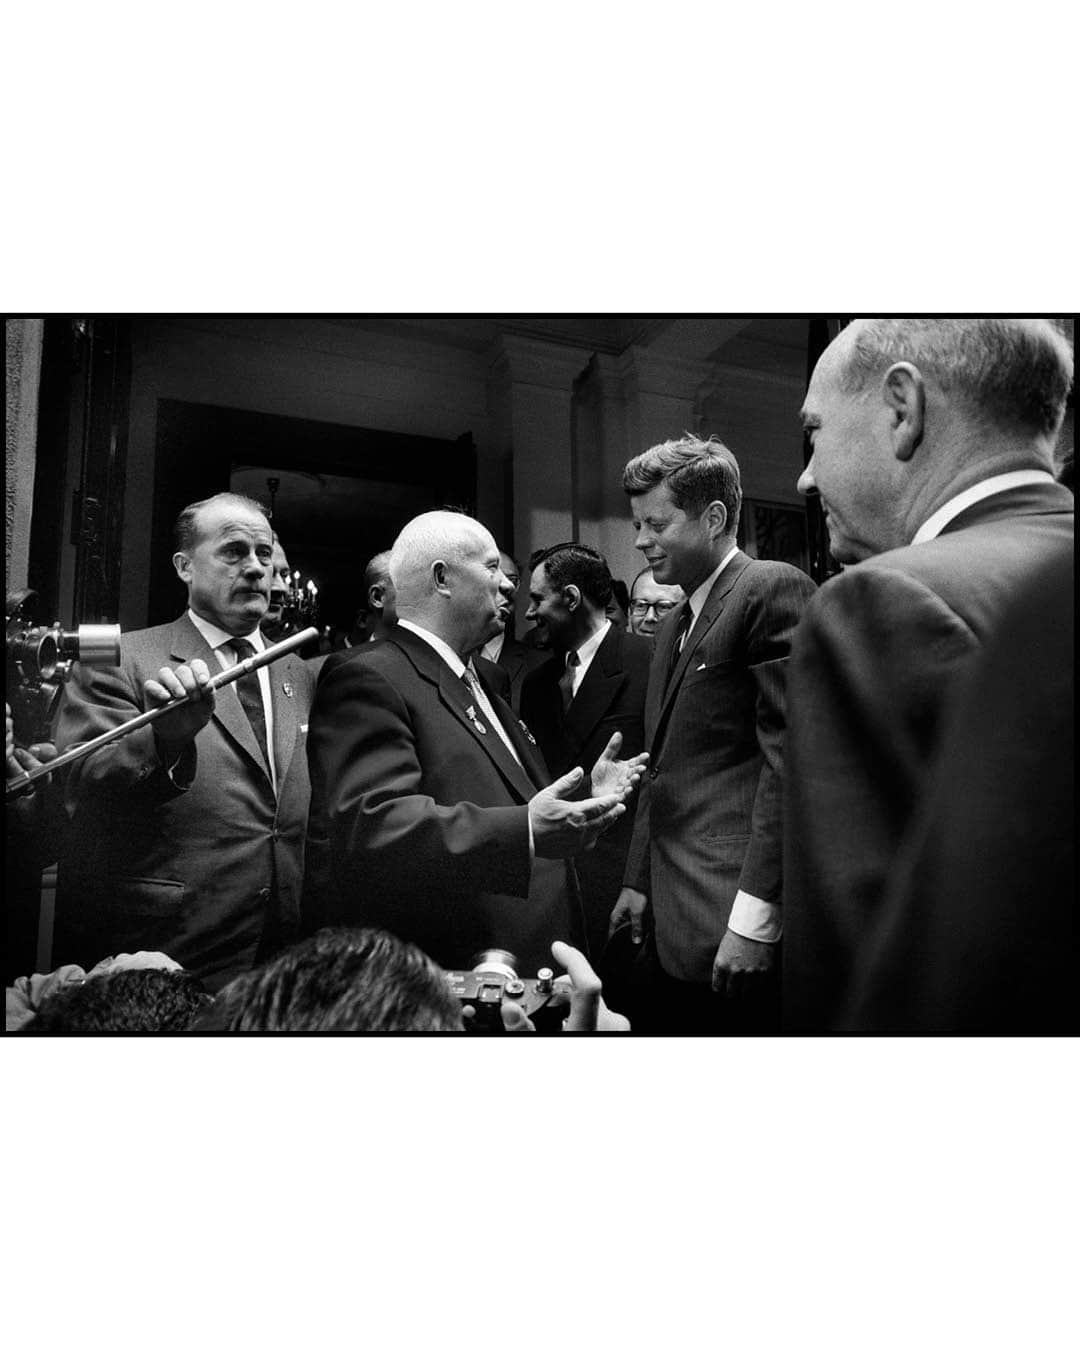 Magnum Photosさんのインスタグラム写真 - (Magnum PhotosInstagram)「Today marks 60 years since the assassination of US President John F. Kennedy in 1963, who, at 46 years old, was shot while riding in a presidential motorcade through downtown Dallas, Texas. The event would become one of the defining moments of the 20th century, leaving a cultural and political imprint that permanently altered the American landscape.⁠ ⁠ Kennedy's political career, including his campaign and election, was documented by Magnum photographers. Cornell Capa's coverage of his presidential run for @life is a lasting document and an intimate portrait of Kennedy's work and character. Capa's efforts continued during his first 100 days in office, granting a rare insight into the beginning of a presidency.⁠ ⁠ @elliotterwitt photographed JFK at several points, from his days as a senator to his funeral, where he captured this image of a mourning Jacqueline Kennedy. ⁠ ⁠ PHOTOS (left to right):⁠ ⁠ (1) US Senator from Massachusetts John F. Kennedy. USA. 1952. © @philippe_halsman_official / Magnum Photos⁠ ⁠ (2) Senator John F. KENNEDY. New York City, USA. 1955. © @elliotterwitt / Magnum Photos⁠ ⁠ (3) Senator John F. Kennedy with his wife, Jackie, and daughter, Caroline. Hyannisport, Massachusetts. 1960. © Dennis Stock / Magnum Photos⁠ ⁠ (4-5) John F. Kennedy campaigning. New York City, USA. 1960. © Cornell Capa / International Center of Photography / Magnum Photos⁠ ⁠ (6) John F. Kennedy campaign. USA. 1960. © Cornell Capa / International Center of Photography / Magnum Photos⁠ ⁠ (7) Soviet premier Nikita Khrushchev and US president John F. Kennedy. Vienna, Austria. 1961. © Cornell Capa / International Center of Photography / Magnum Photos⁠ ⁠ (8) President John F. Kennedy in the Oval Office. Washington, D.C. USA. 1962. © @elliotterwitt / Magnum Photos⁠ ⁠ (9) Reaction to the assassination of John F. Kennedy. New York City, USA. 1963. © @waynemillerphotoarchive / Magnum Photos⁠ ⁠ (10) Jacqueline Kennedy at John F. Kennedy's Funeral. Arlington, Virginia. USA. 1963. @elliotterwitt / Magnum Photos」11月23日 3時02分 - magnumphotos